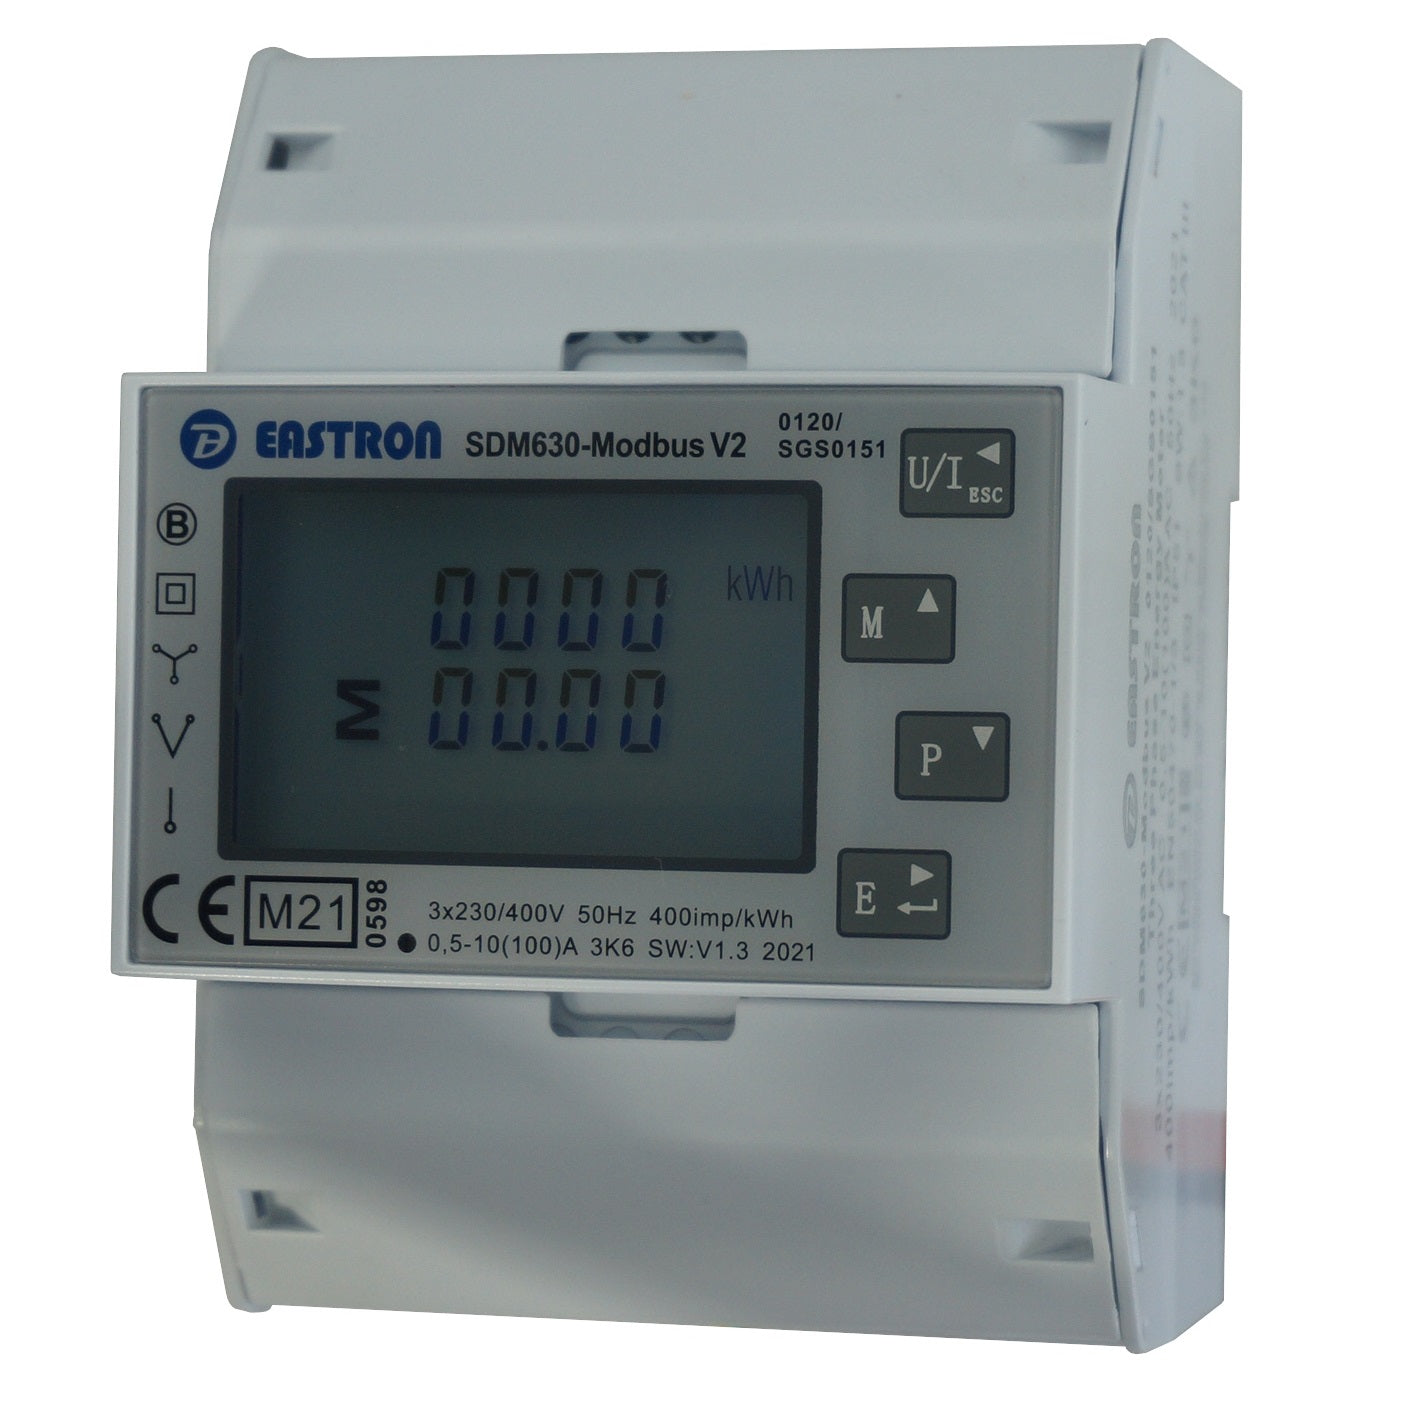 SDM630Modbus-MID-V2-CL1, DIN Rail Mount kWh Meter, 3 Phase, Class 1, 100Amp Direct Connect, w/ 2 x pulse outputs and RS485 Modbus RTU Comms, MID Approved